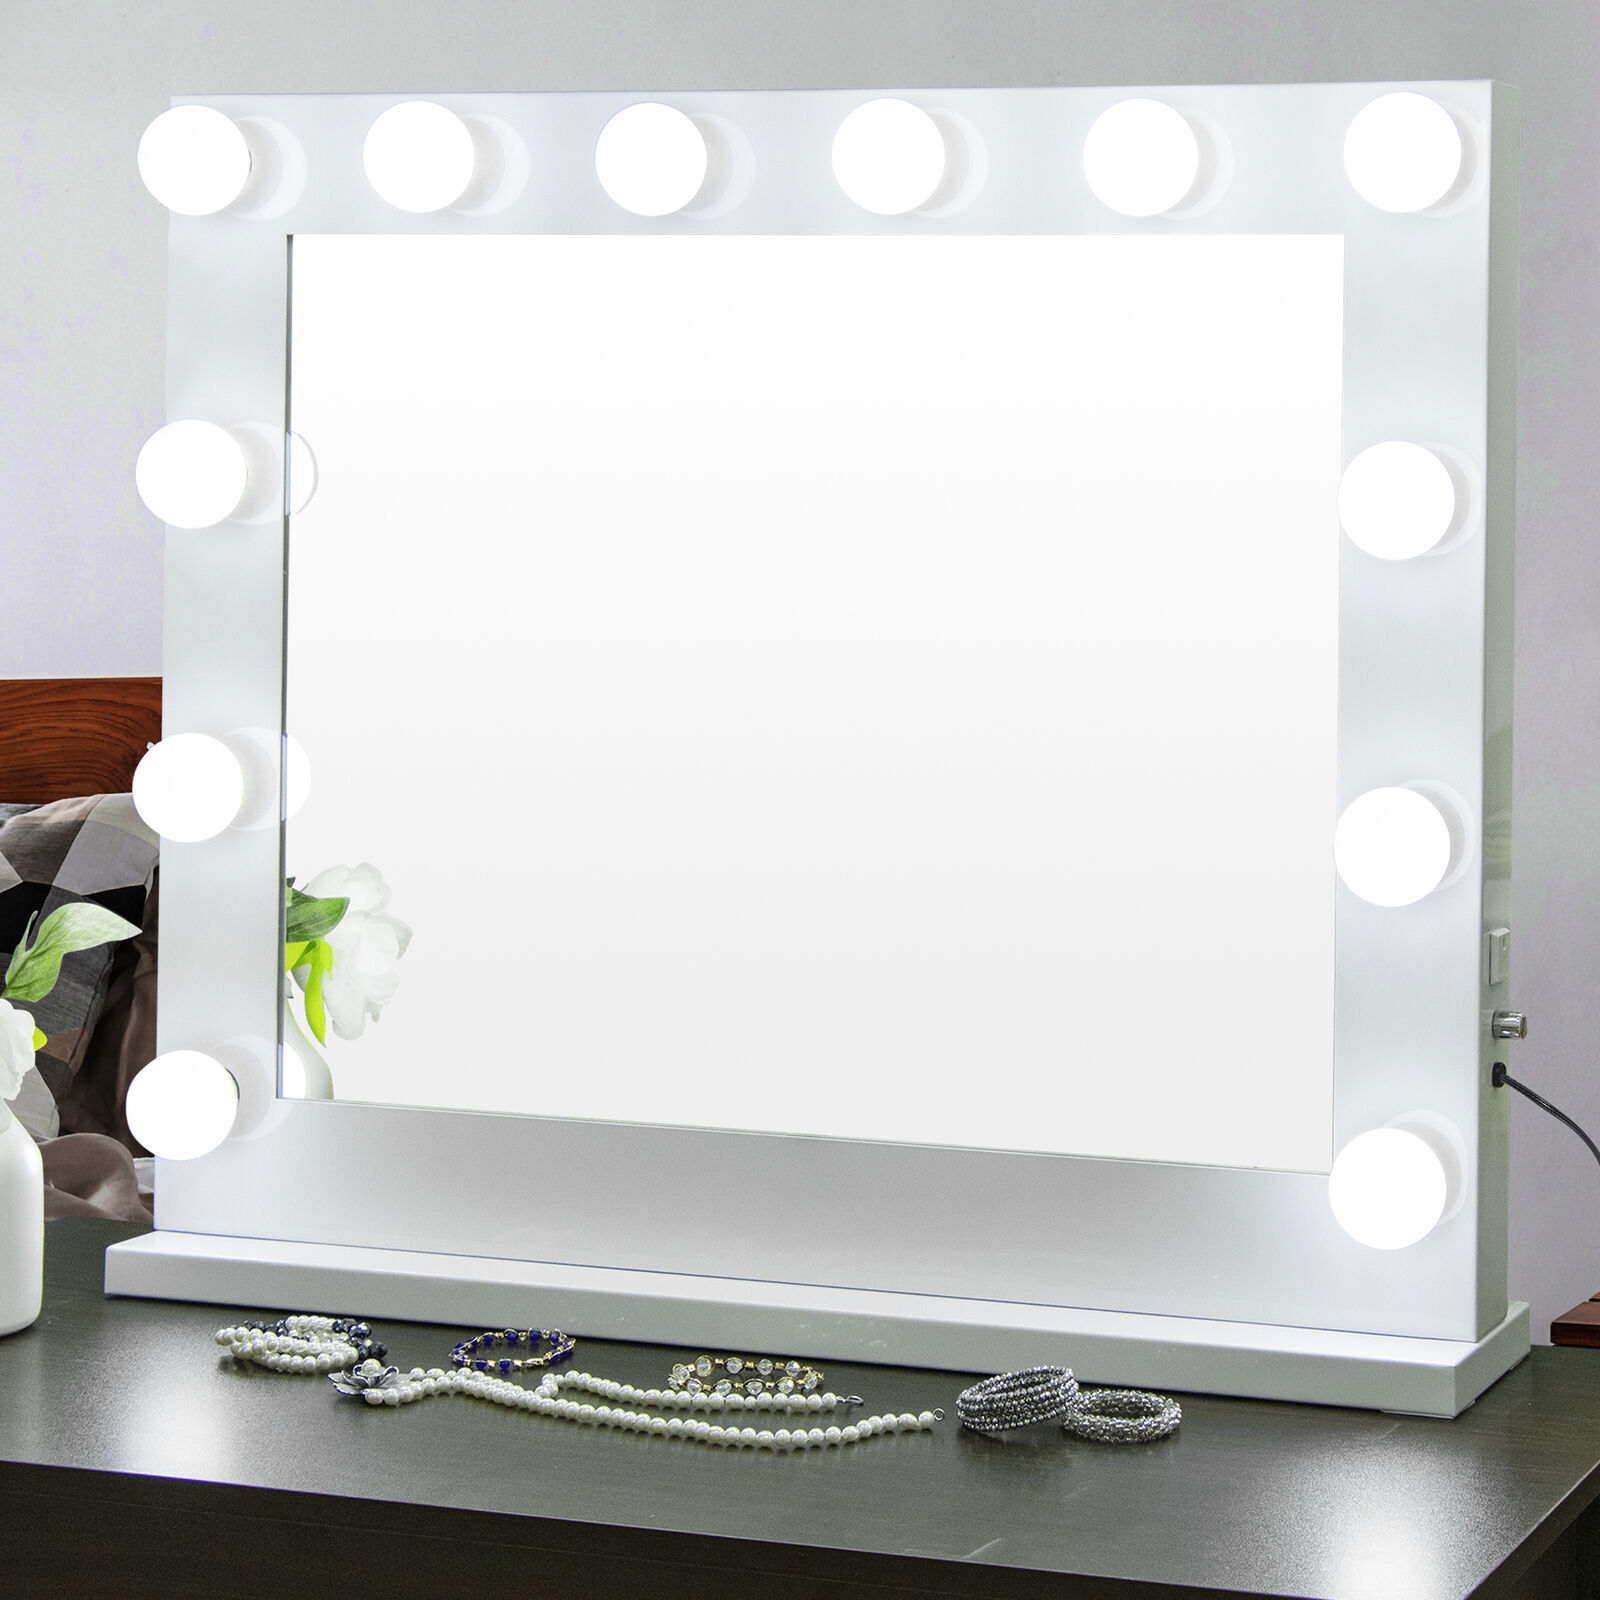 thinkstar 14 Dimmable Leds Bulbs Vanity Mirror With Lights Hollywood Style Makeup Mirror